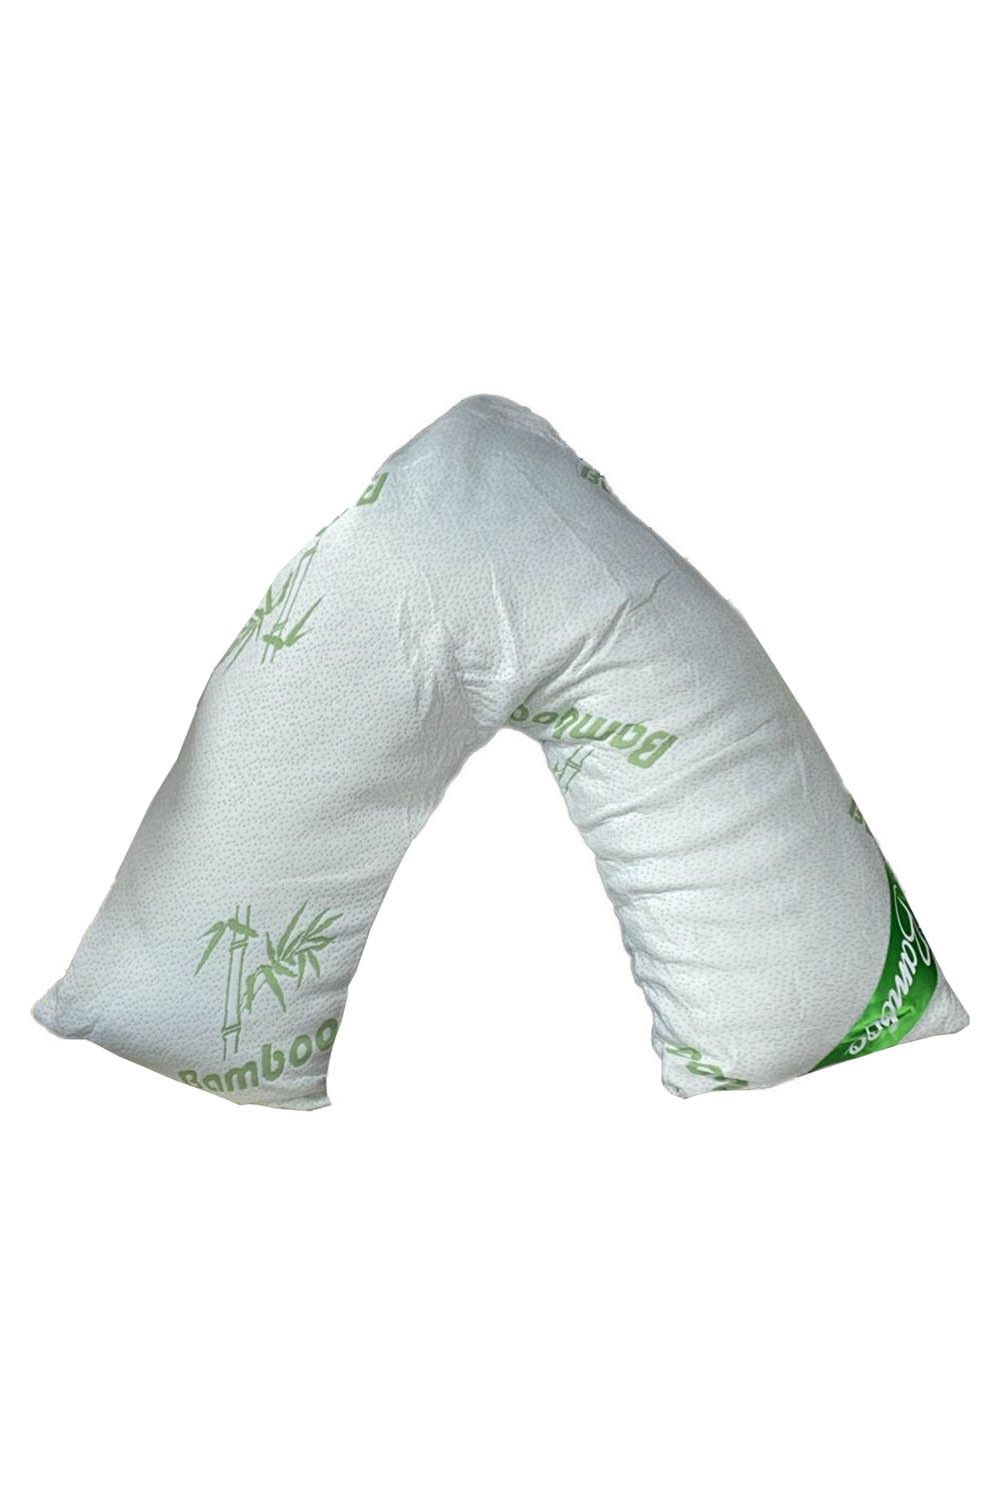 Hugs & Kisses V Shape Bamboo Memory Foam Pillow Extra Filled for Maternity and Support Super Soft Comfortable